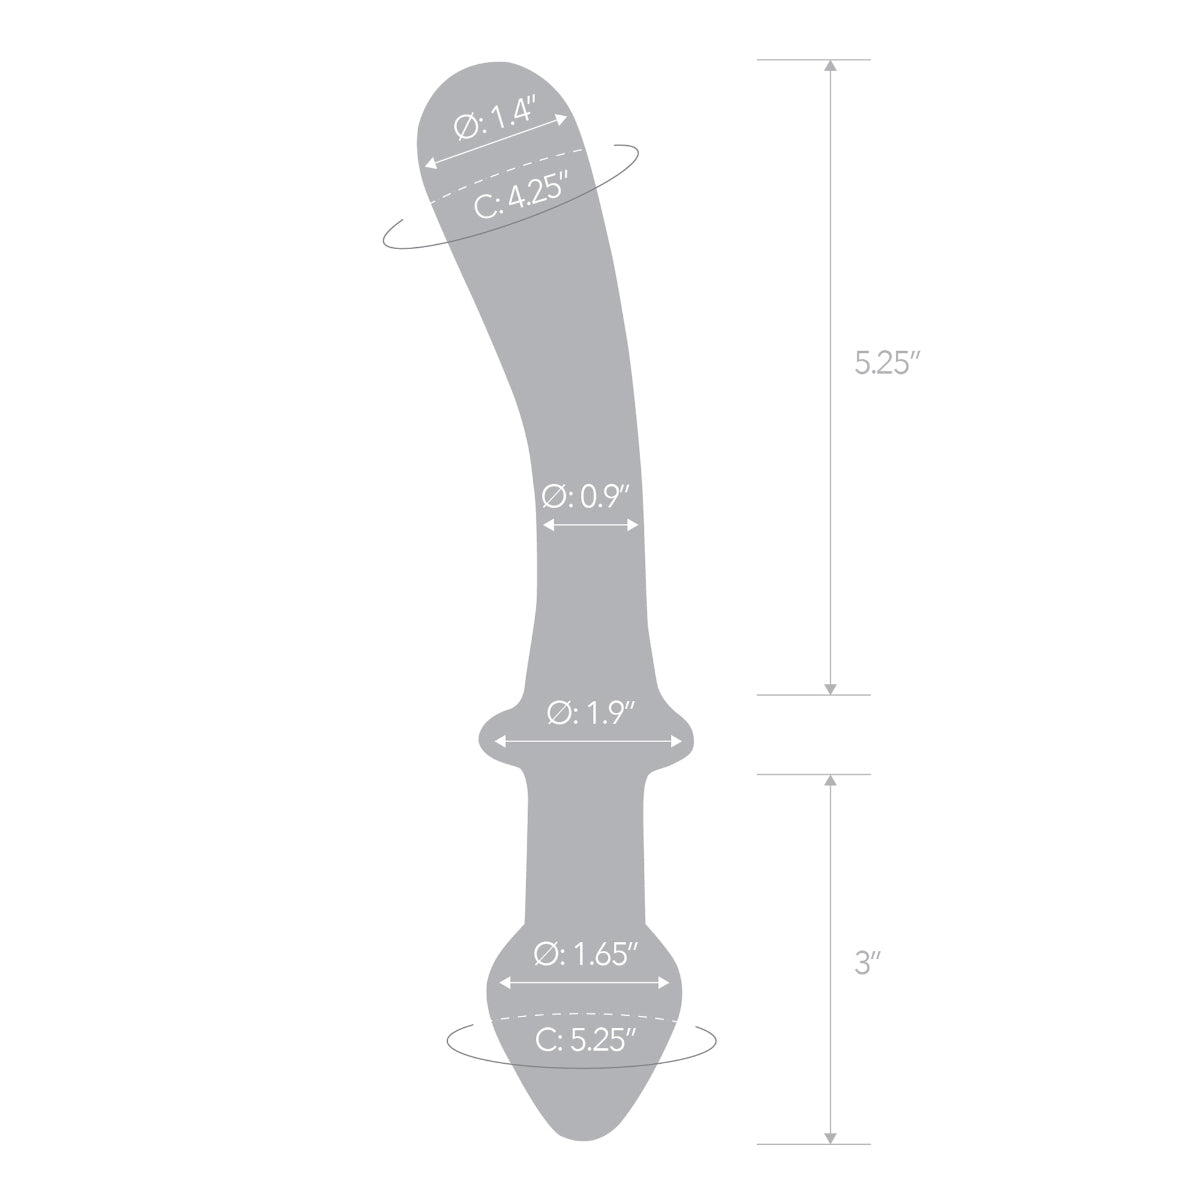 Glas 9inch Classic Curved | Dual Ended Dildo